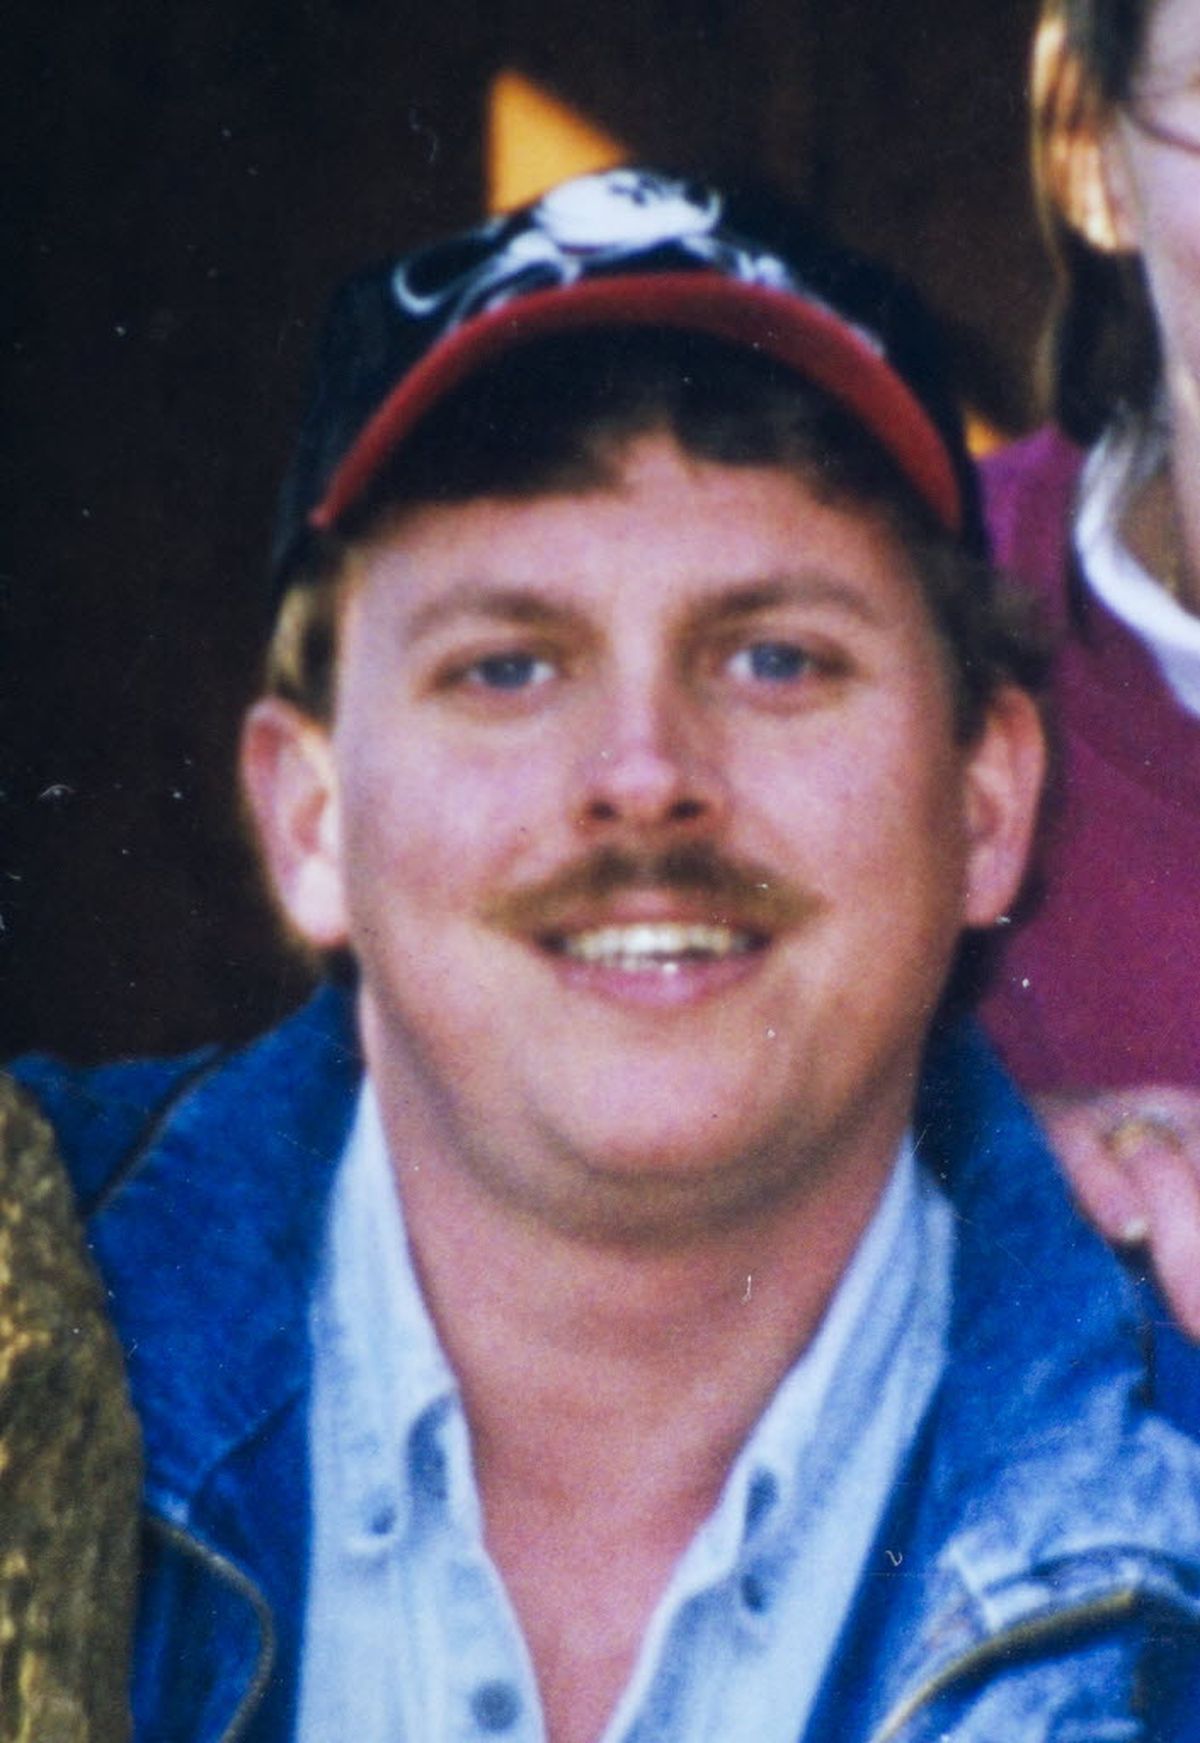 A reportedly armed and suicidal man shot to death by Spokane police Monday night has been identified by family members as James Edward Rogers, 45.  (Rogers family)